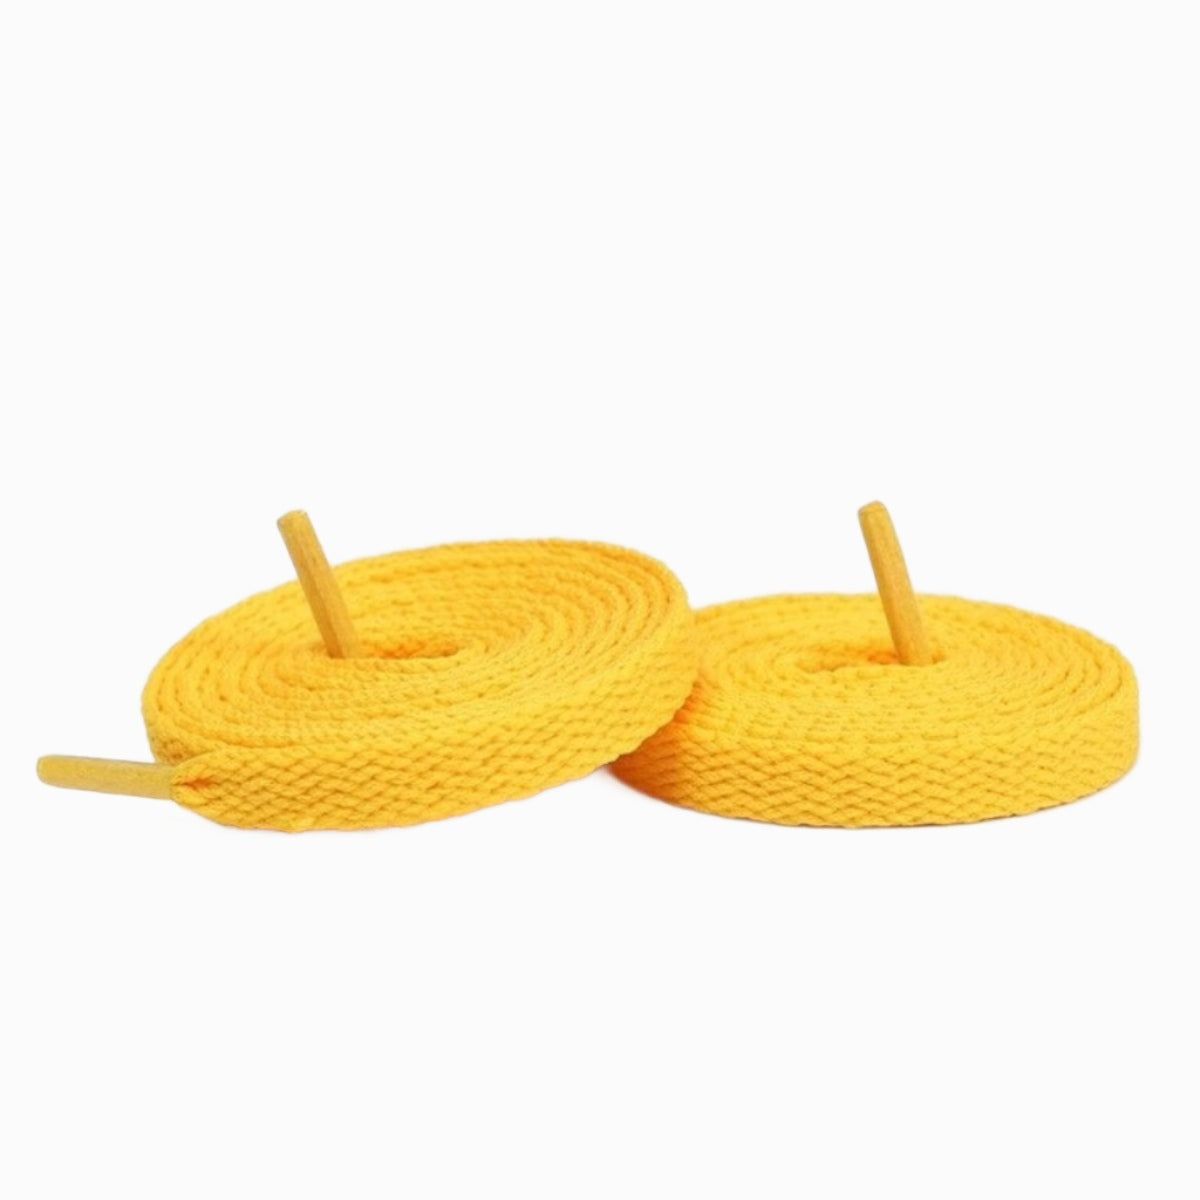 golden-yellow-fun-shoelaces-suitable-for-tying shoelaces-on-popular-sneakers